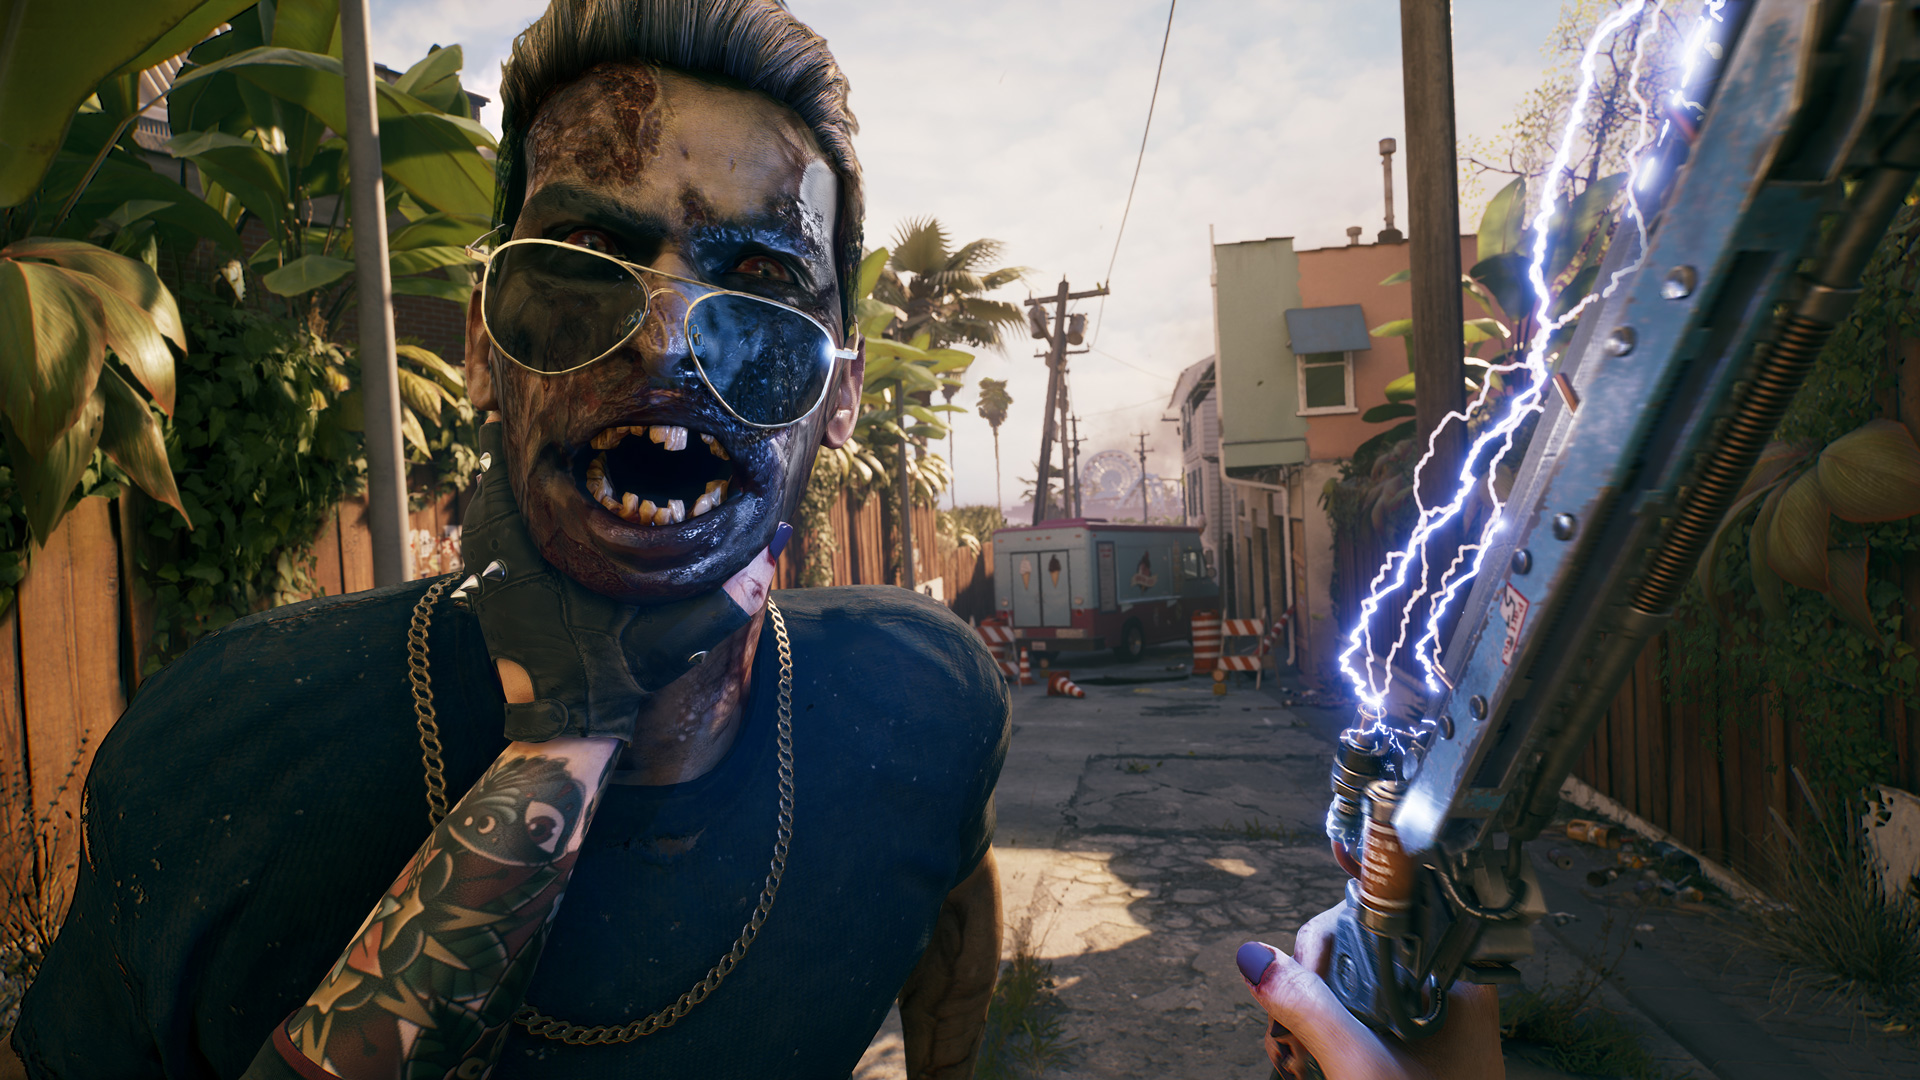 Dead Island 2 review roundup